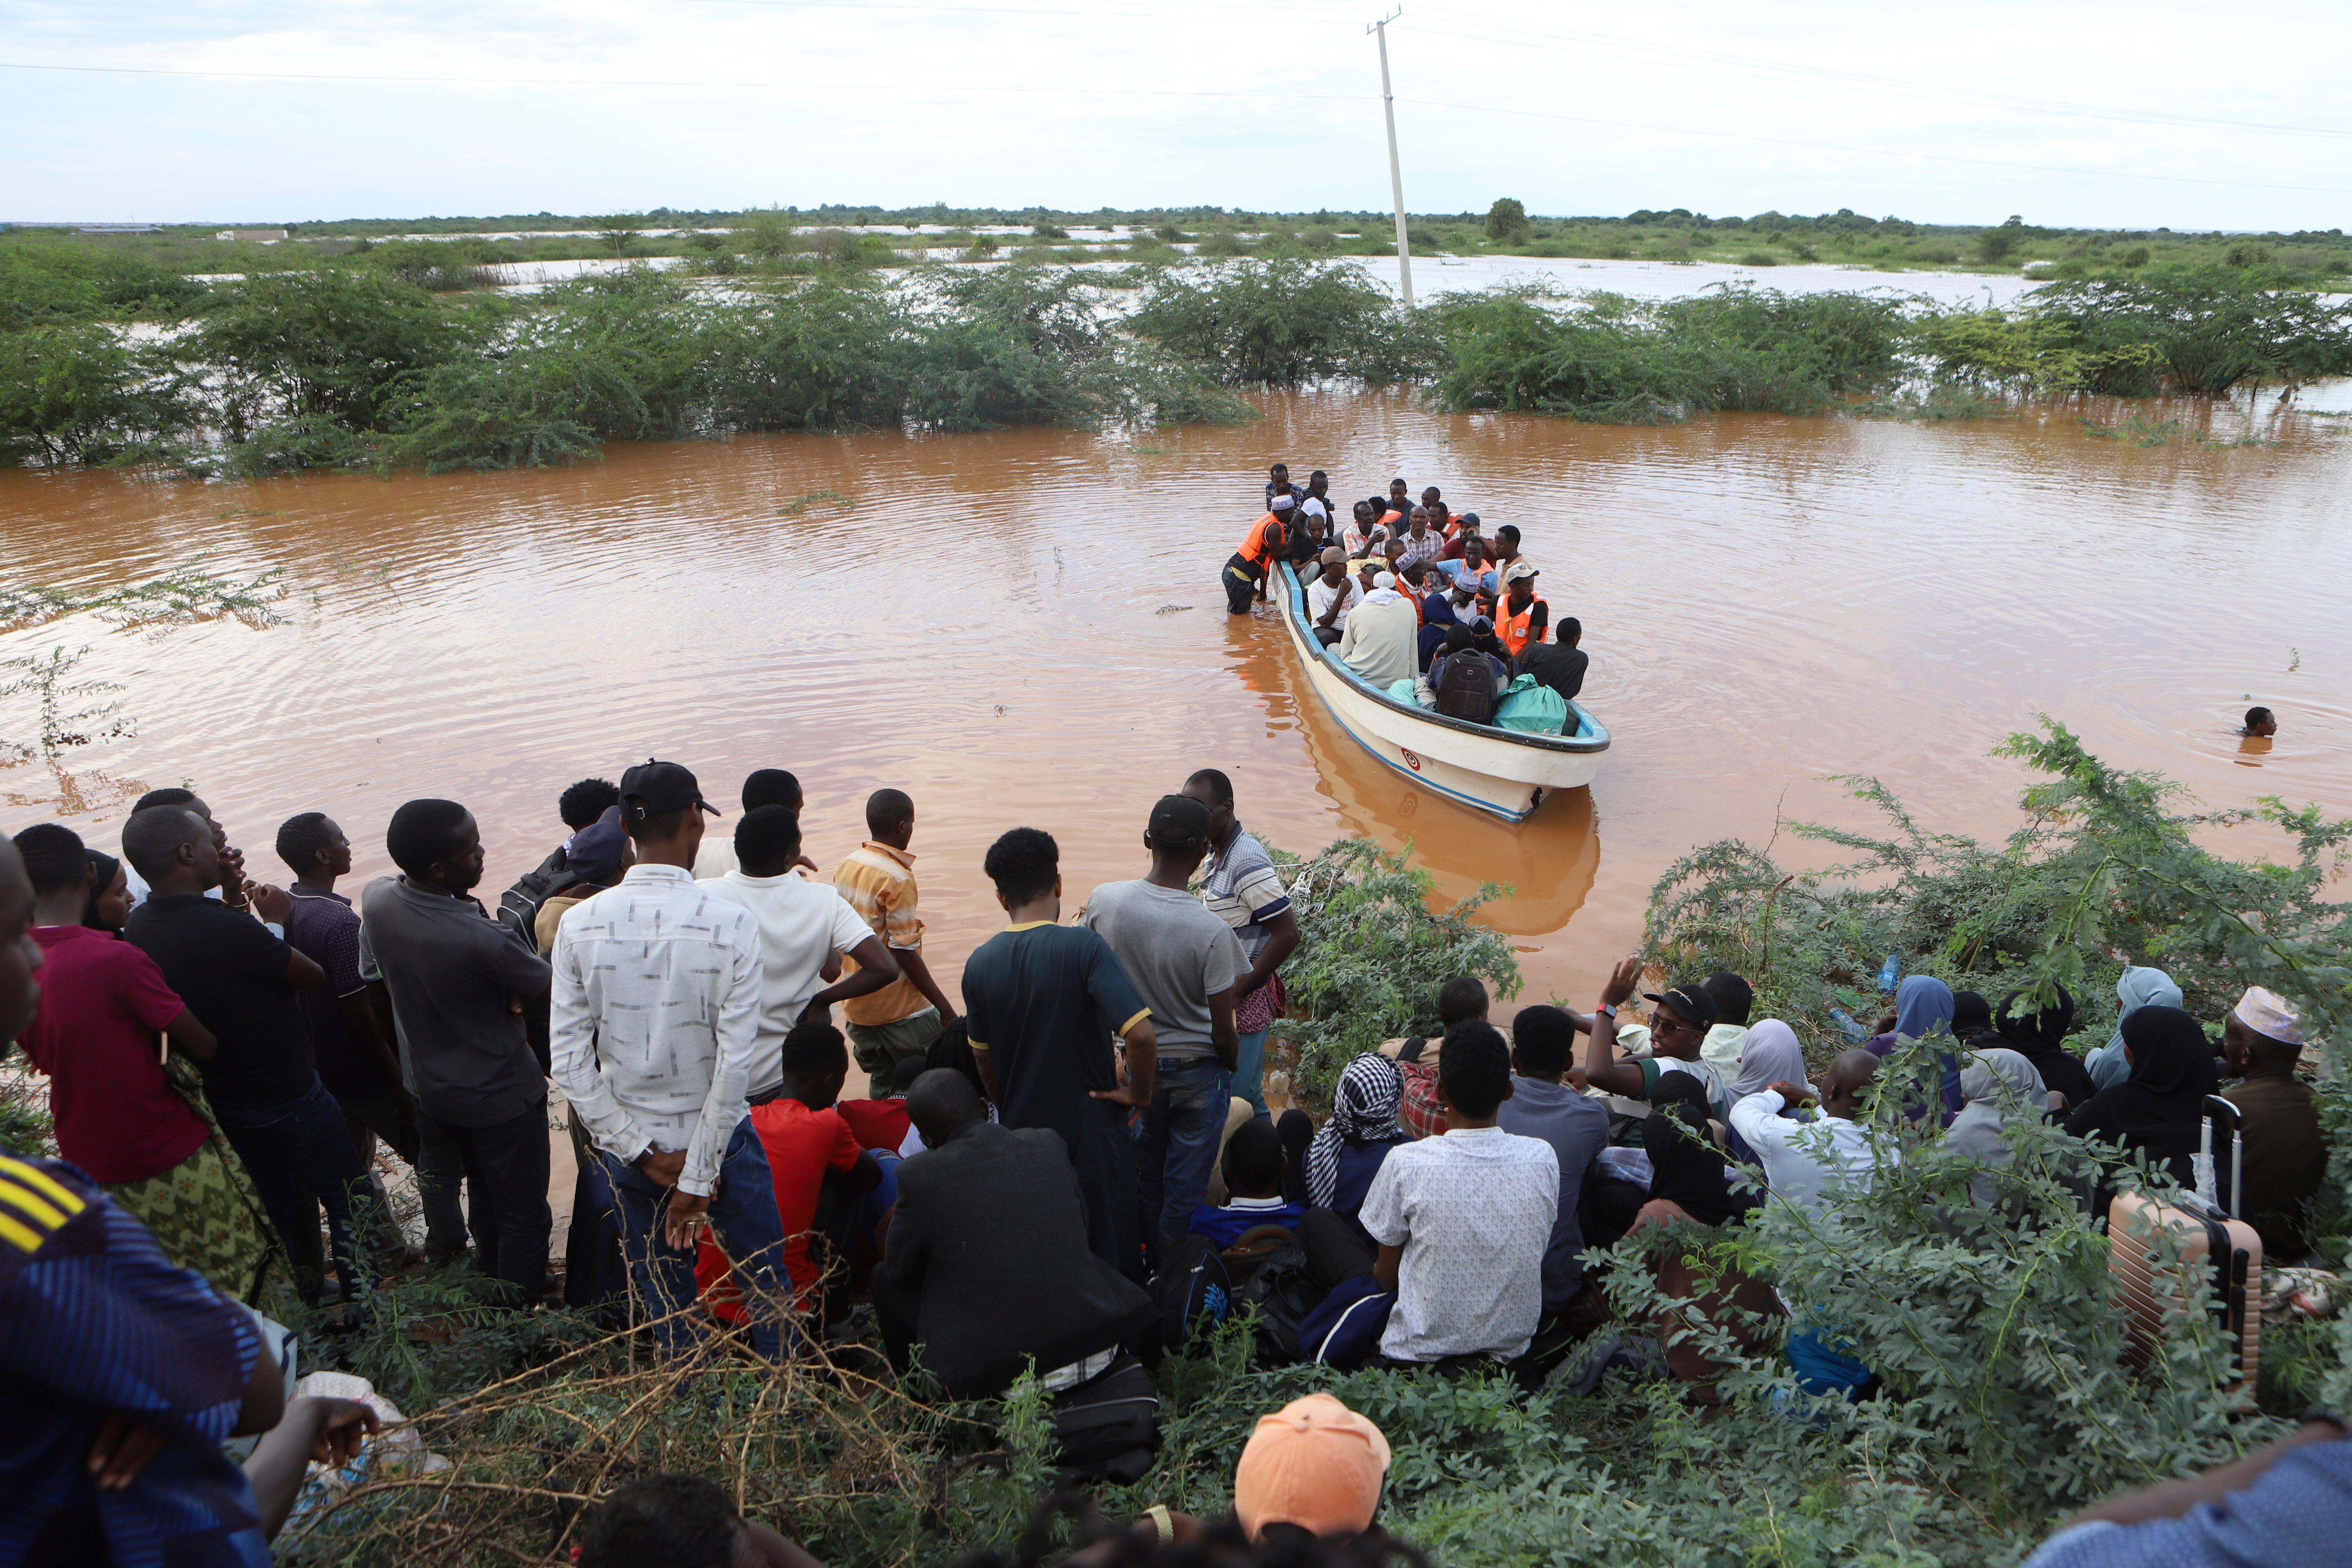 People cross a flooded area at Mororo, border of Tana River and Garissa counties, North Eastern Kenya